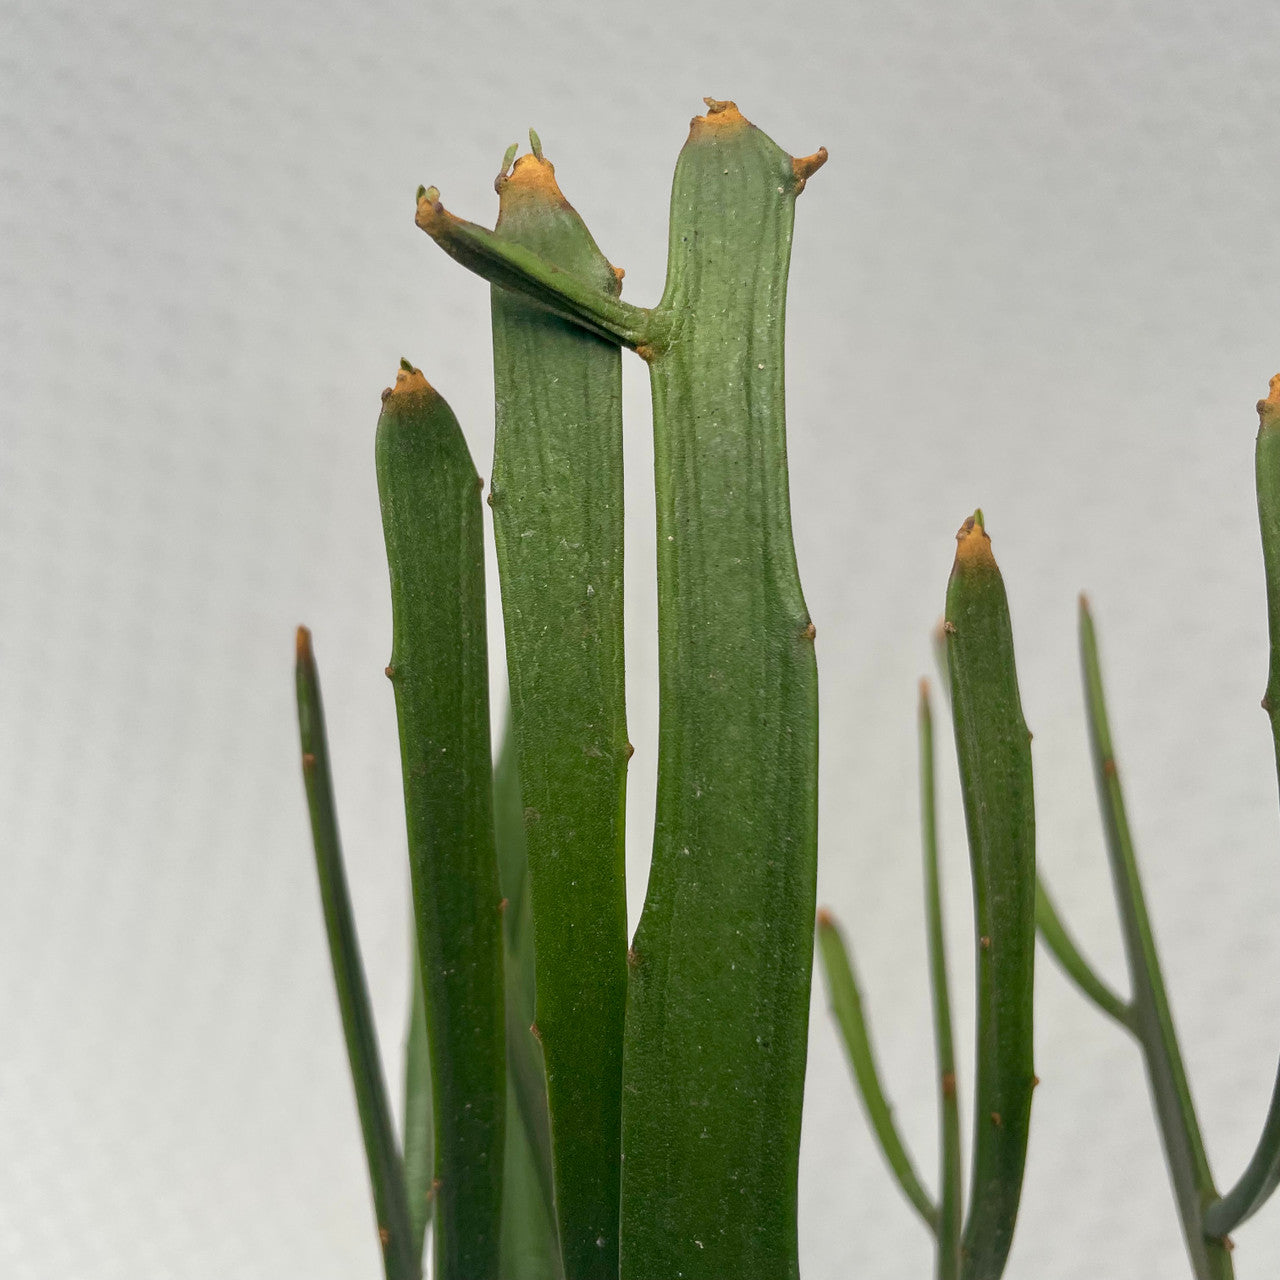 a Euphorbia Xylophylloides cutting up close to show detail